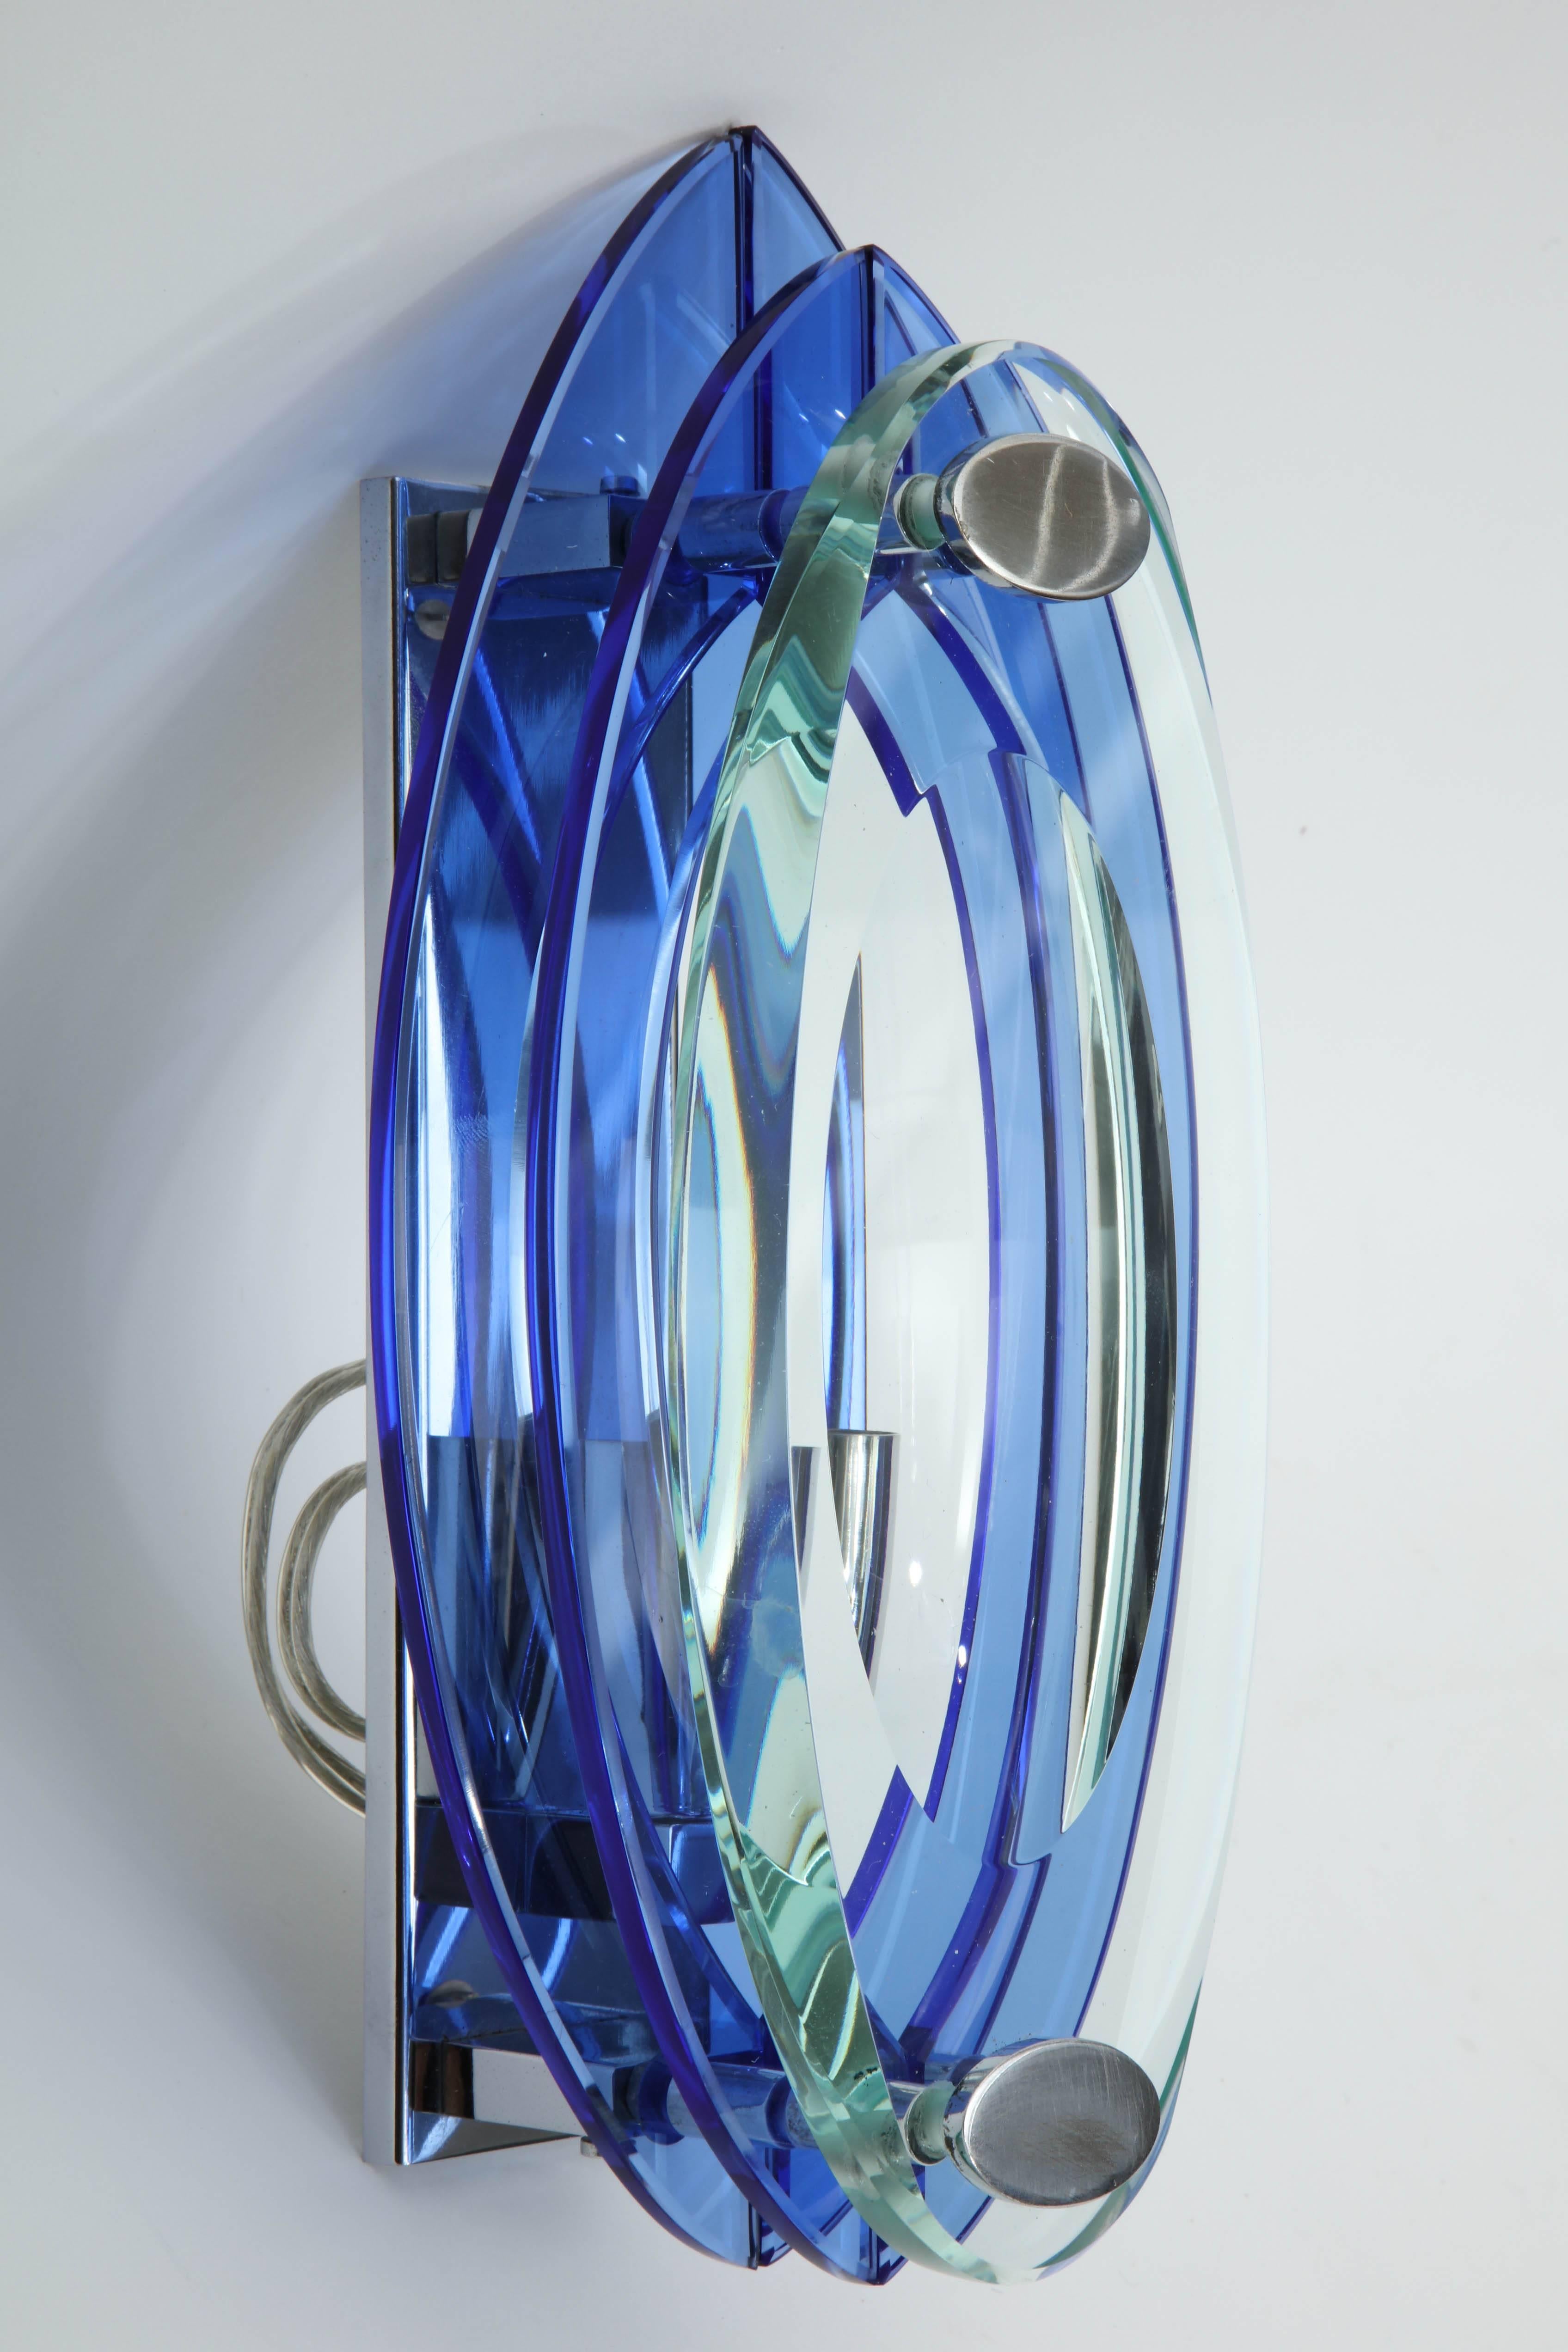 Pair of elliptical shaped Murano glass sconces composed from layers of blue and clear glass on chrome frame. Each sconce has one-light source, 60W Max. Rewired for use in the USA.